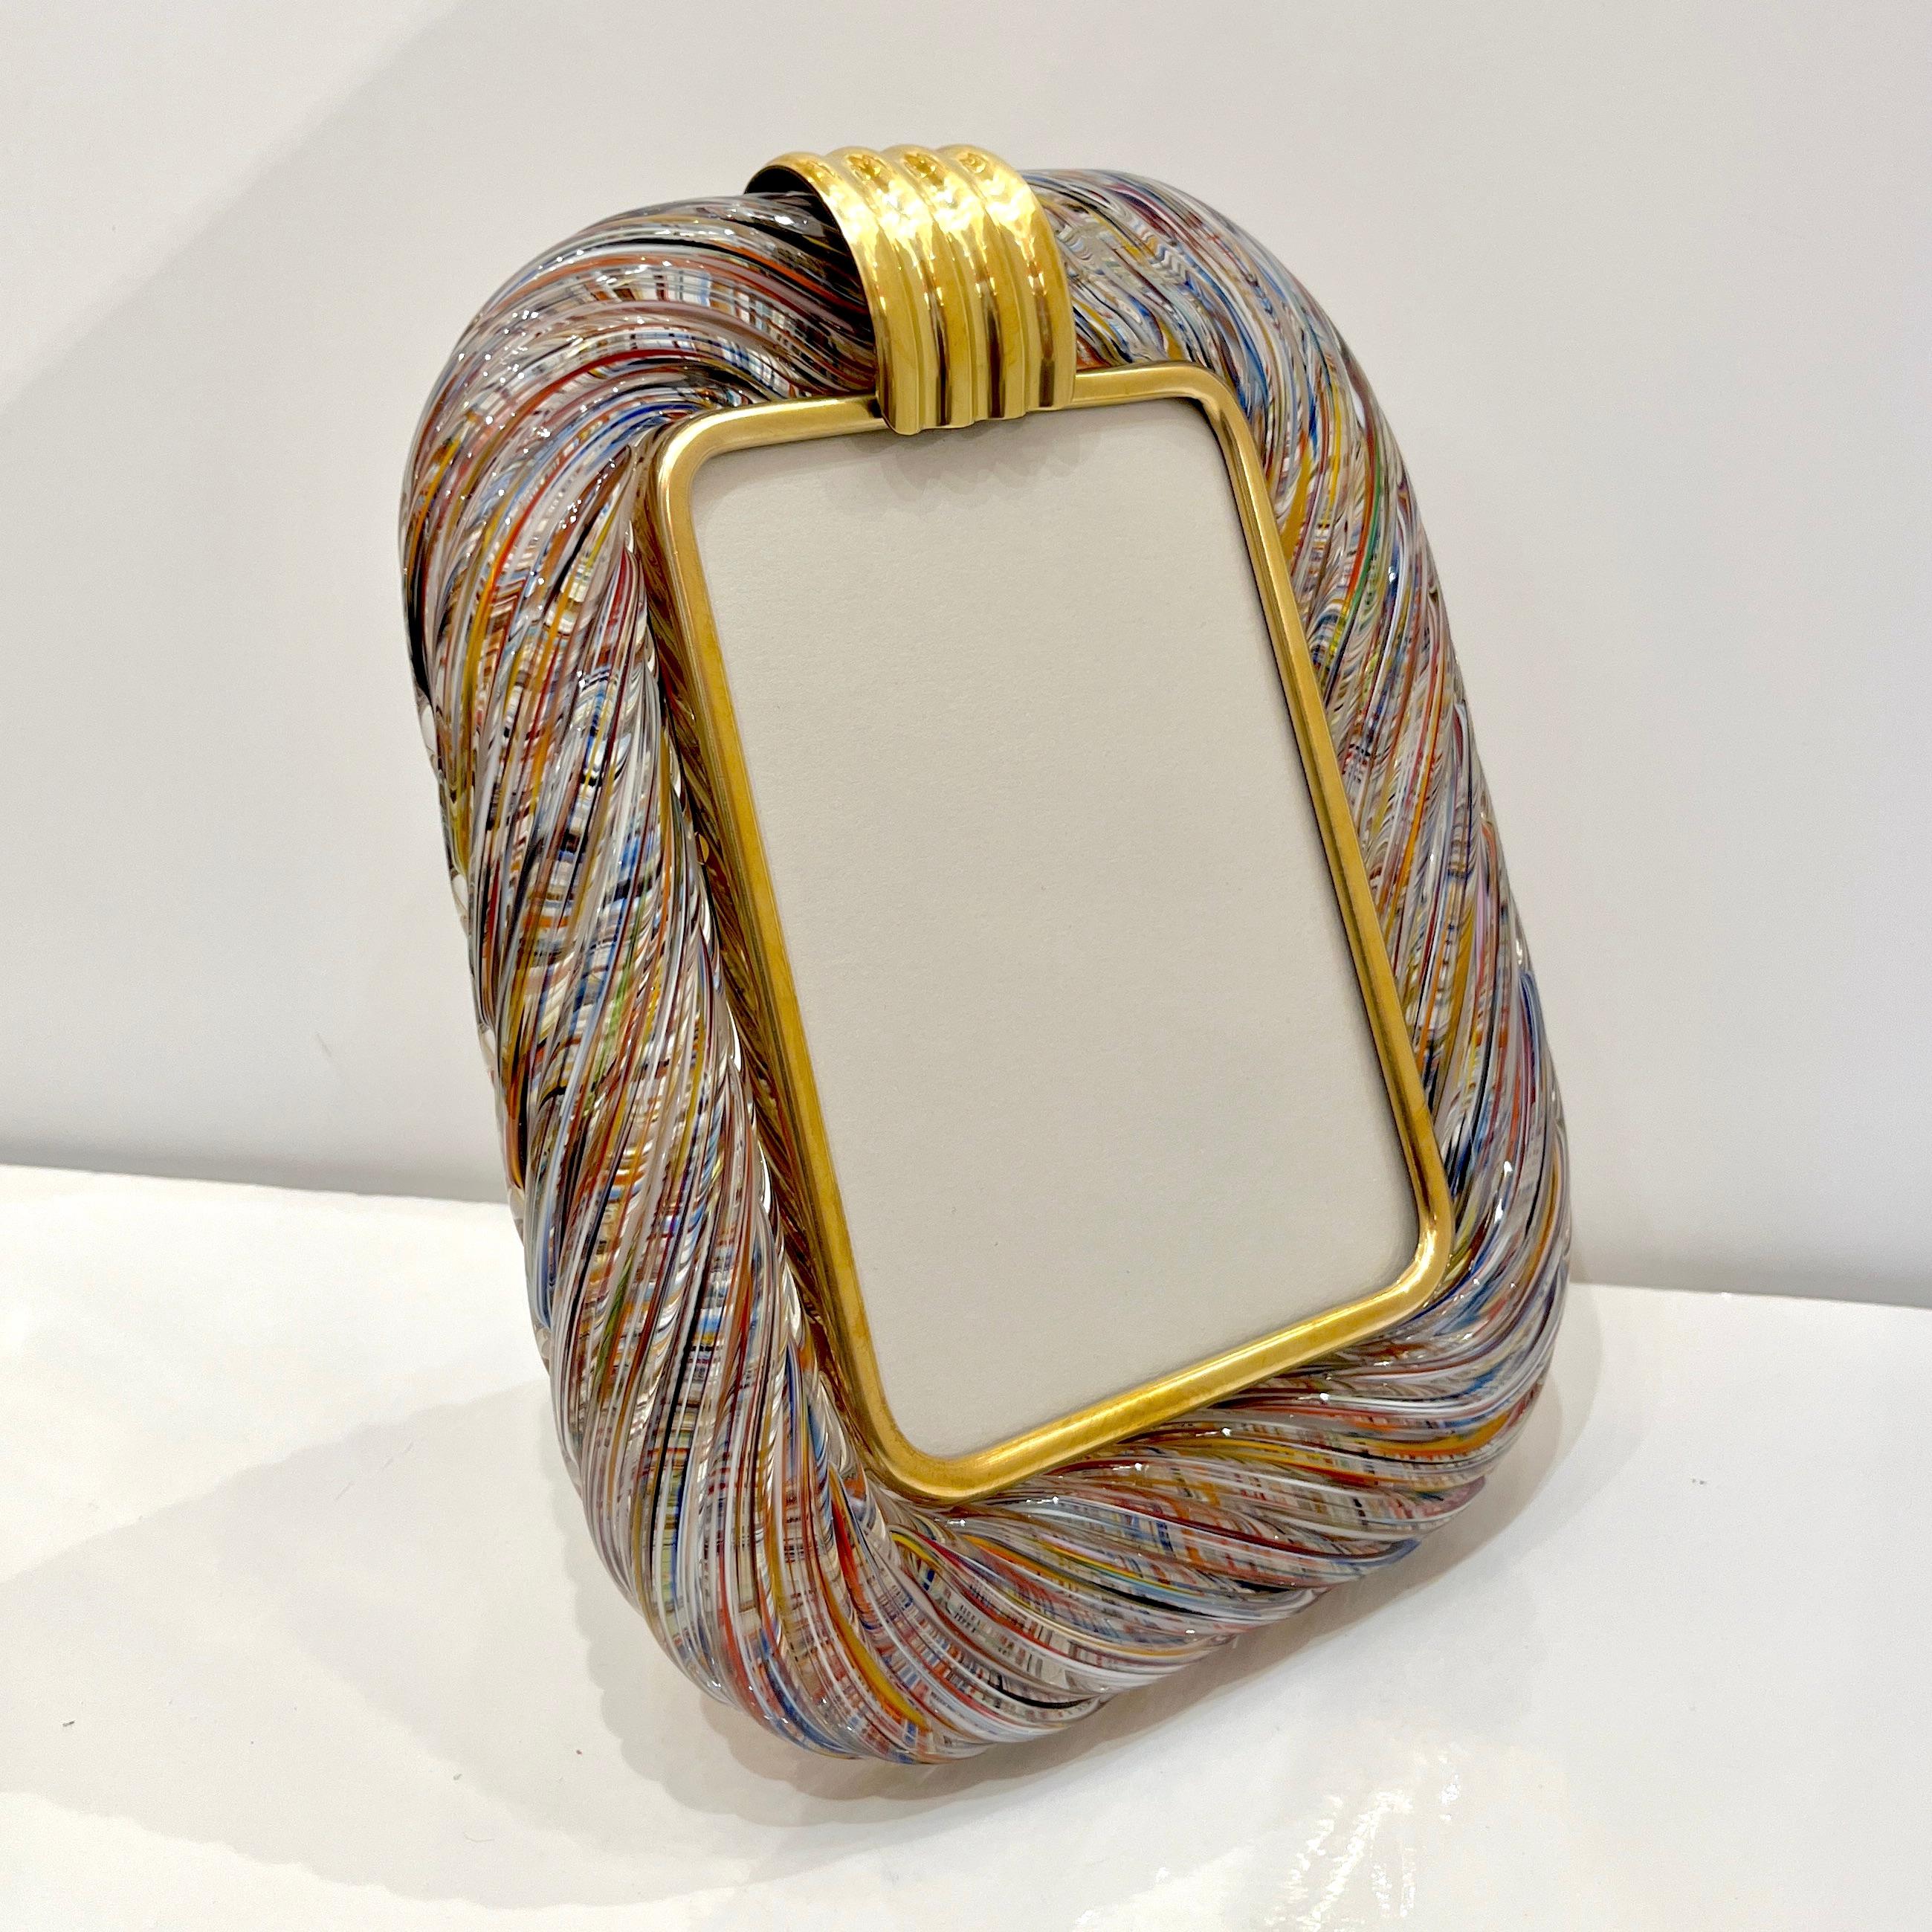 Barovier Toso 21st Century Multicolor Filigrana Murano Glass Photo Frame In Excellent Condition For Sale In New York, NY